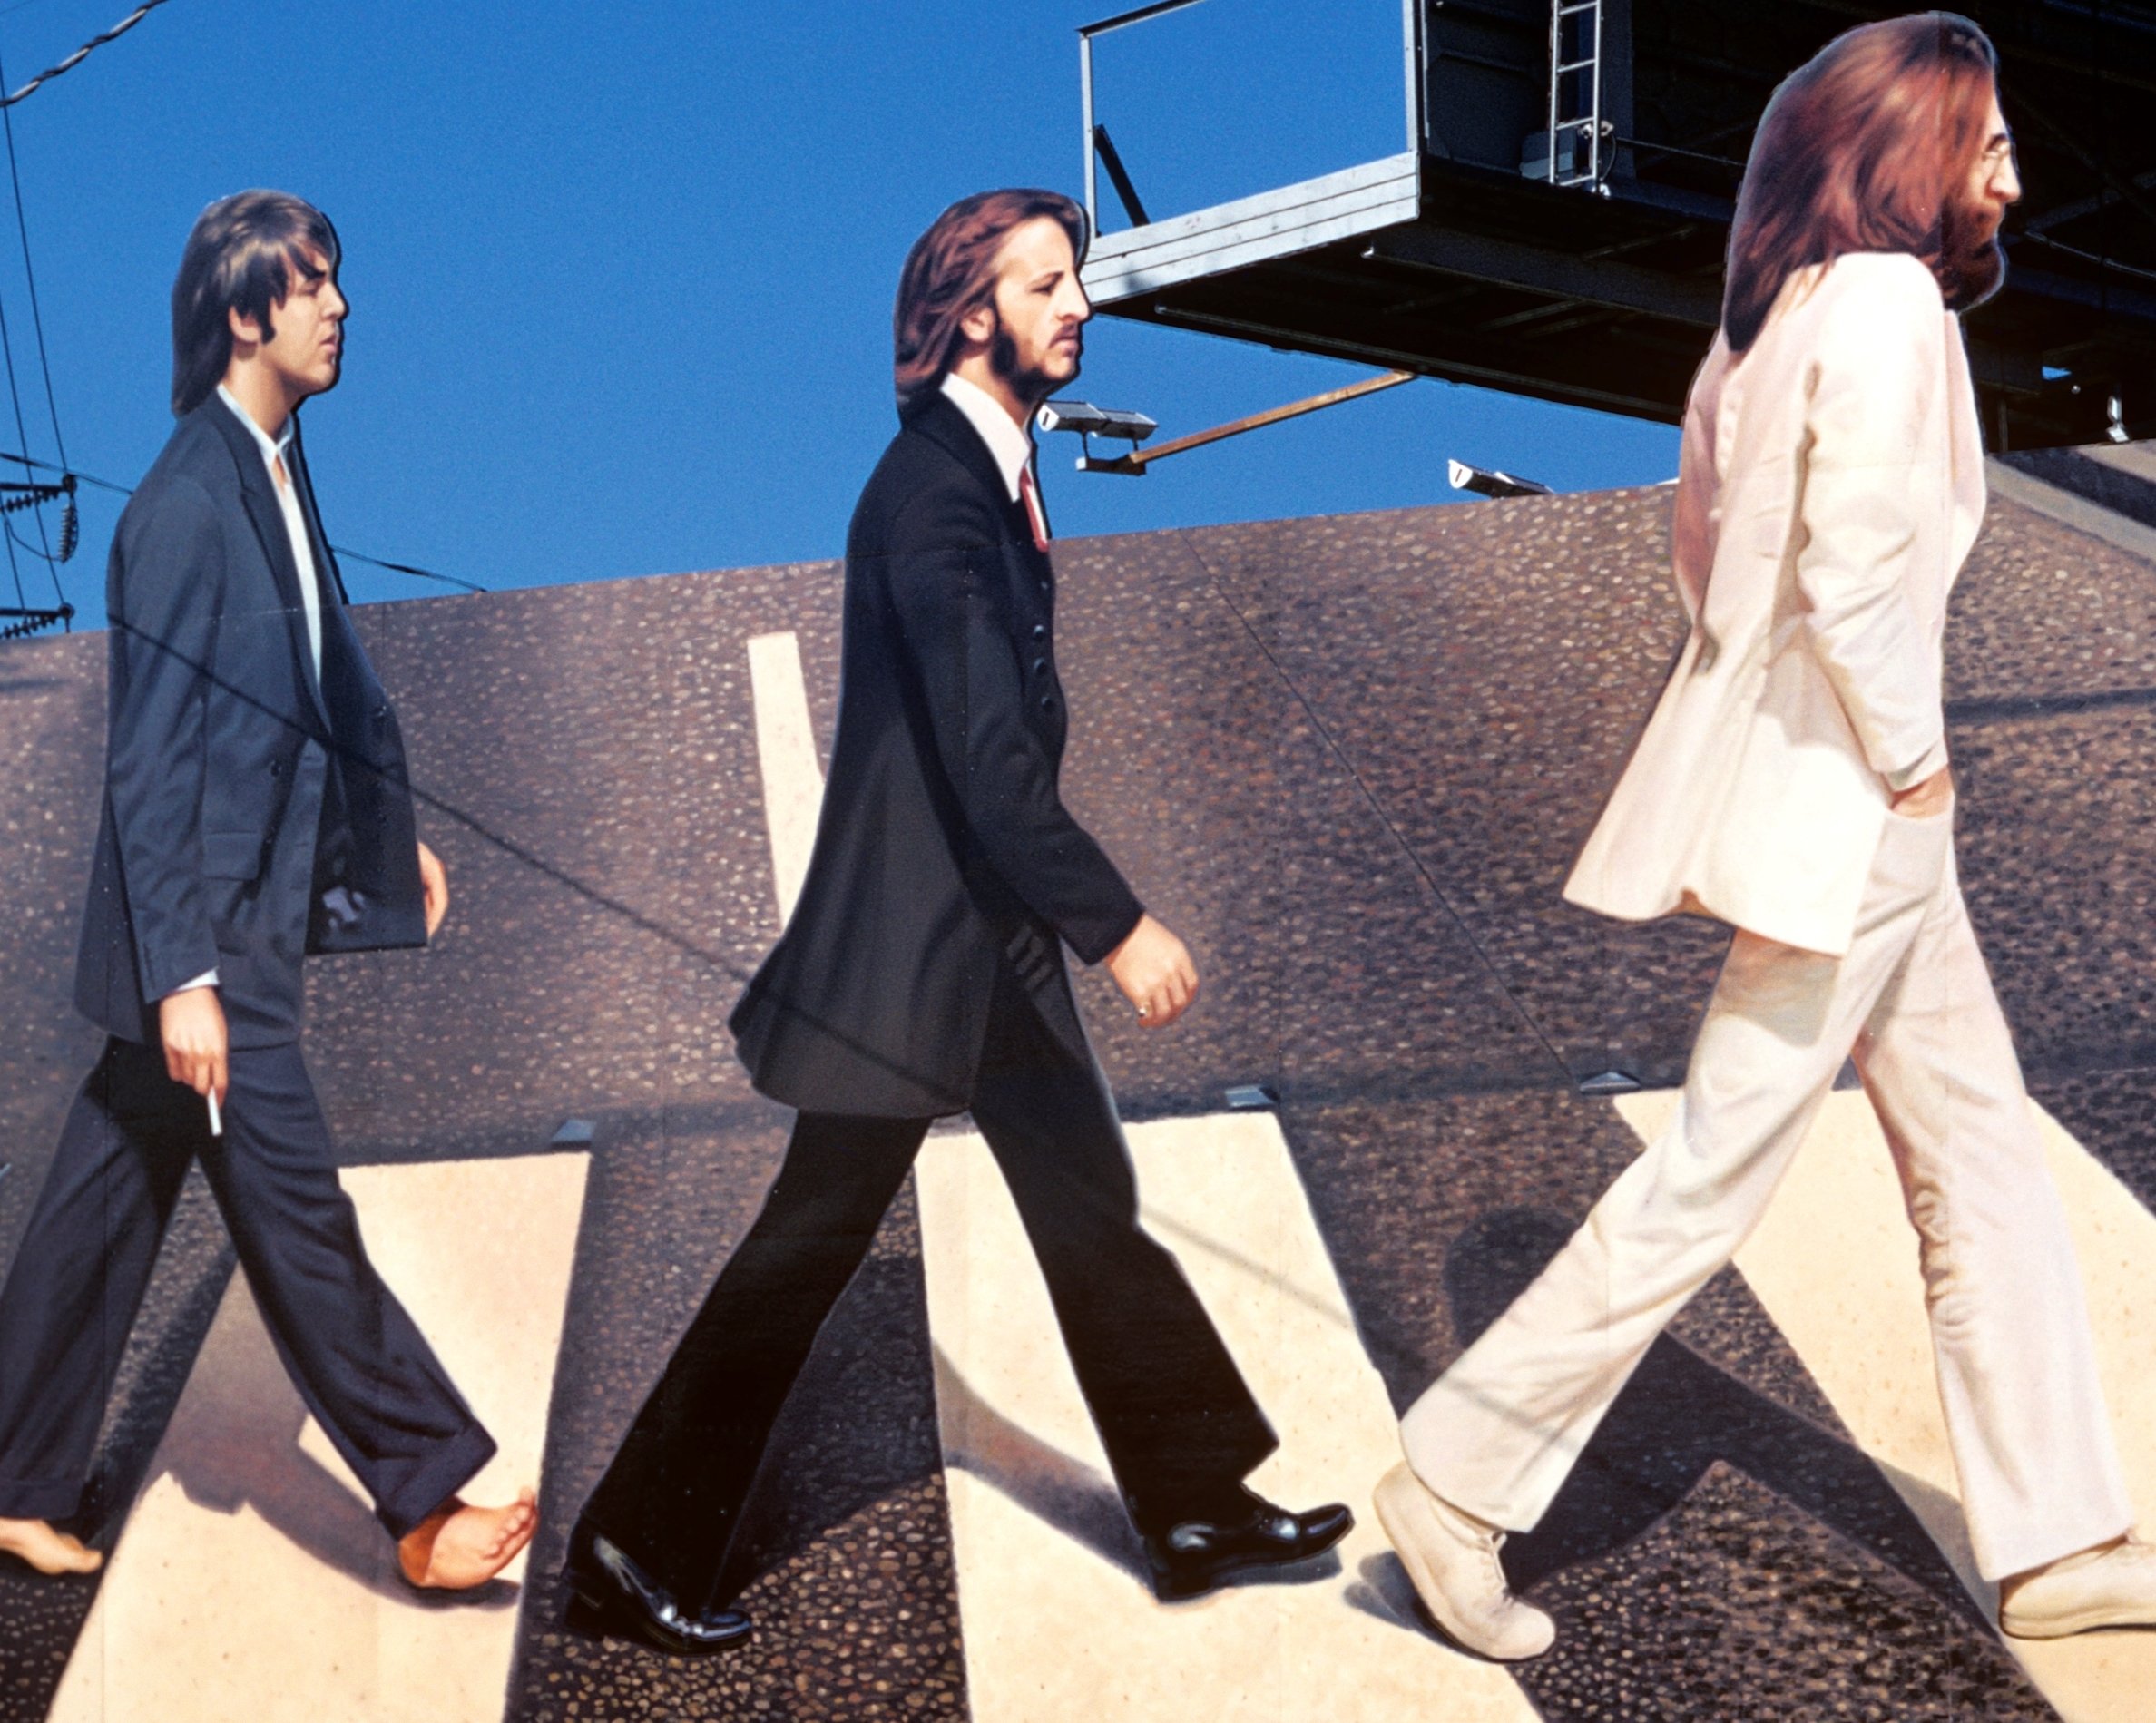 Paul McCartney, Ringo Starr, and John Lennon on a cover depicting the cover of The Beatles' 'Abbey Road'